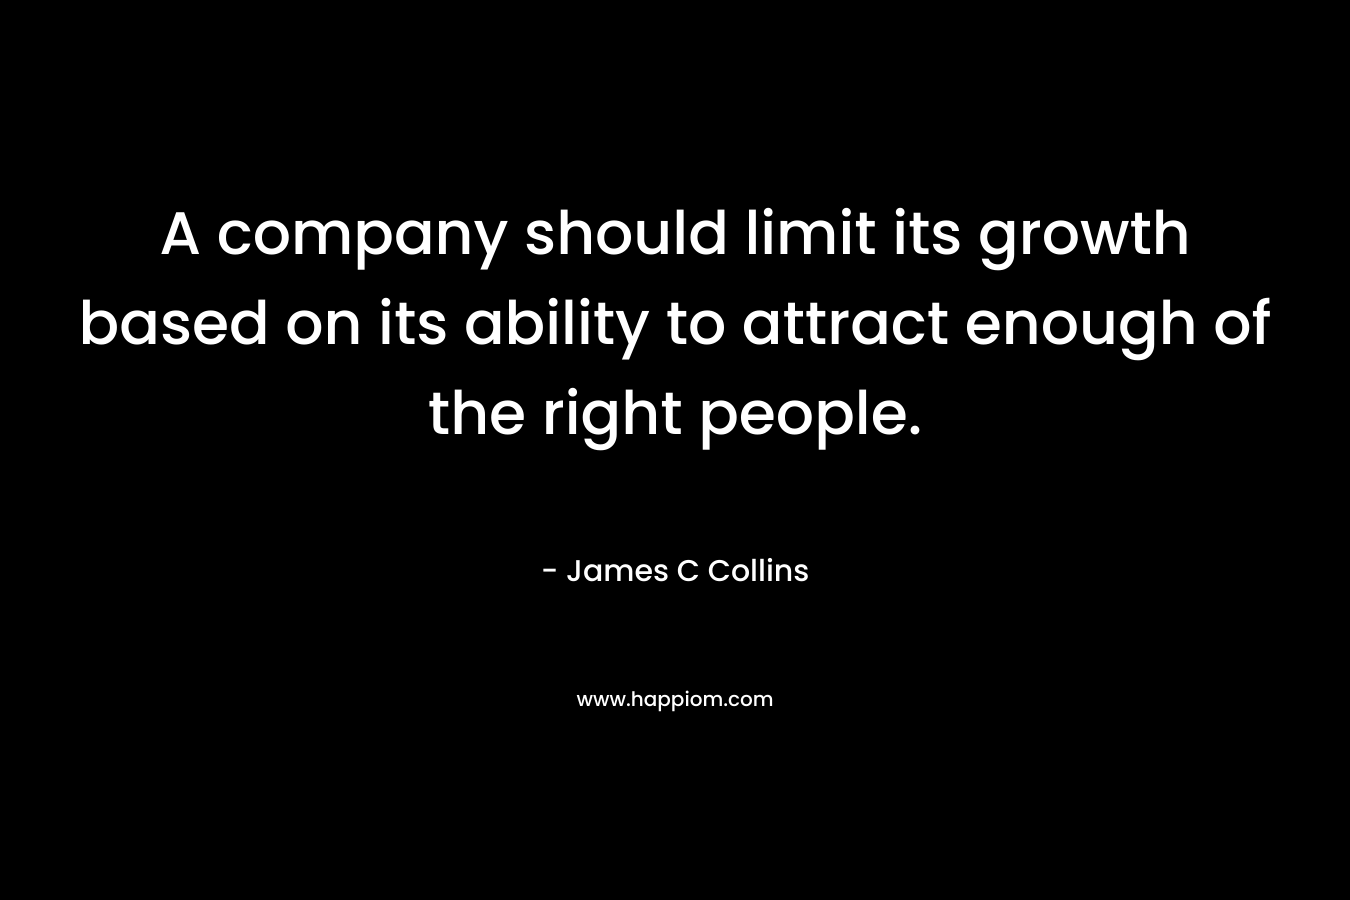 A company should limit its growth based on its ability to attract enough of the right people. – James C Collins